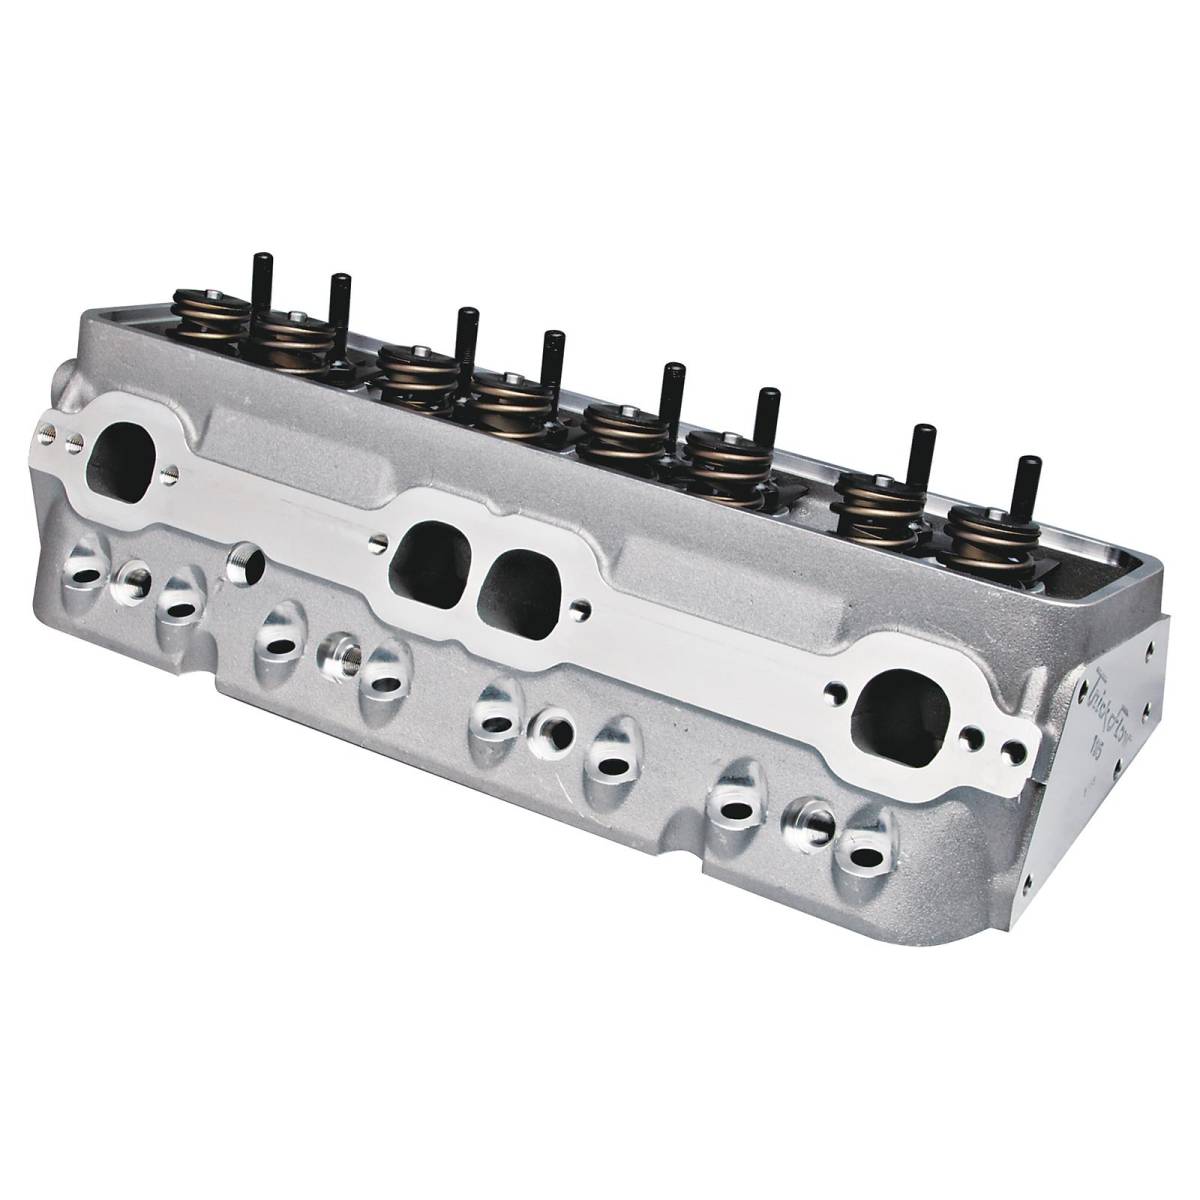 Trickflow - Trickflow Super 23 Cylinder Heads, SB Chevy, 195cc Intake, CNC Ported 72cc Chambers, 1.460" Dual Springs - Image 1